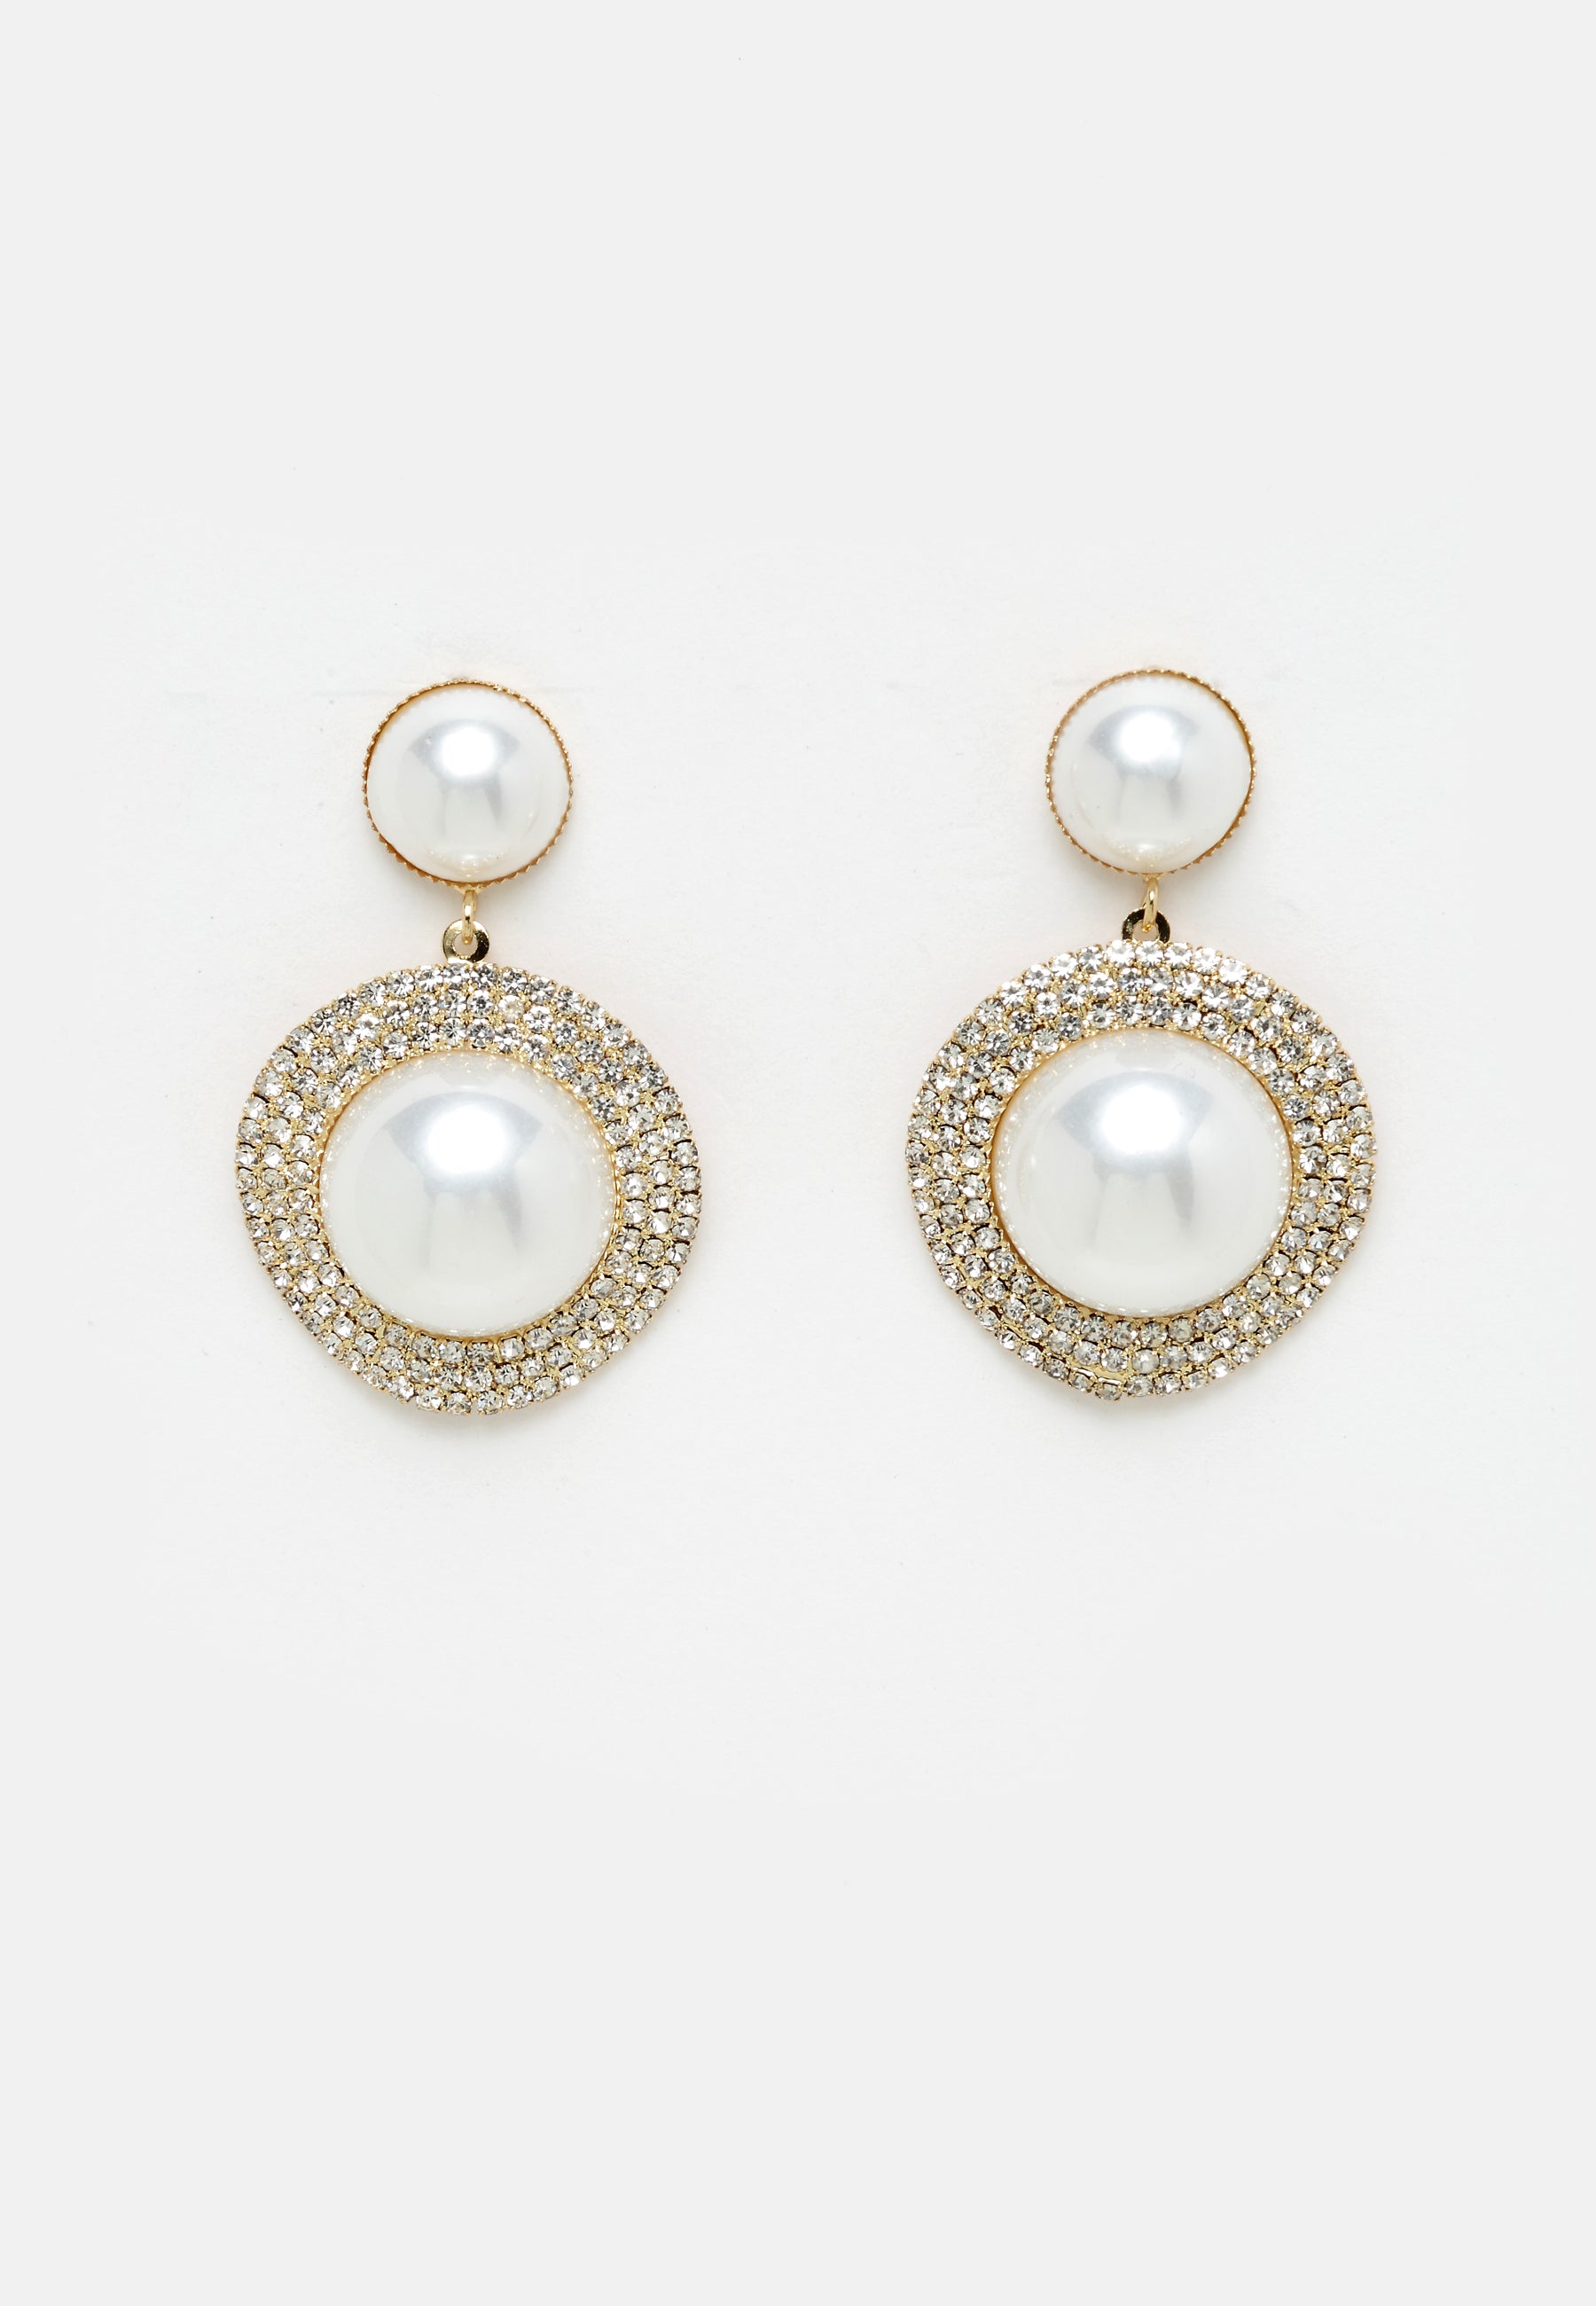 Intricate Gold-Plated Dangling Earring